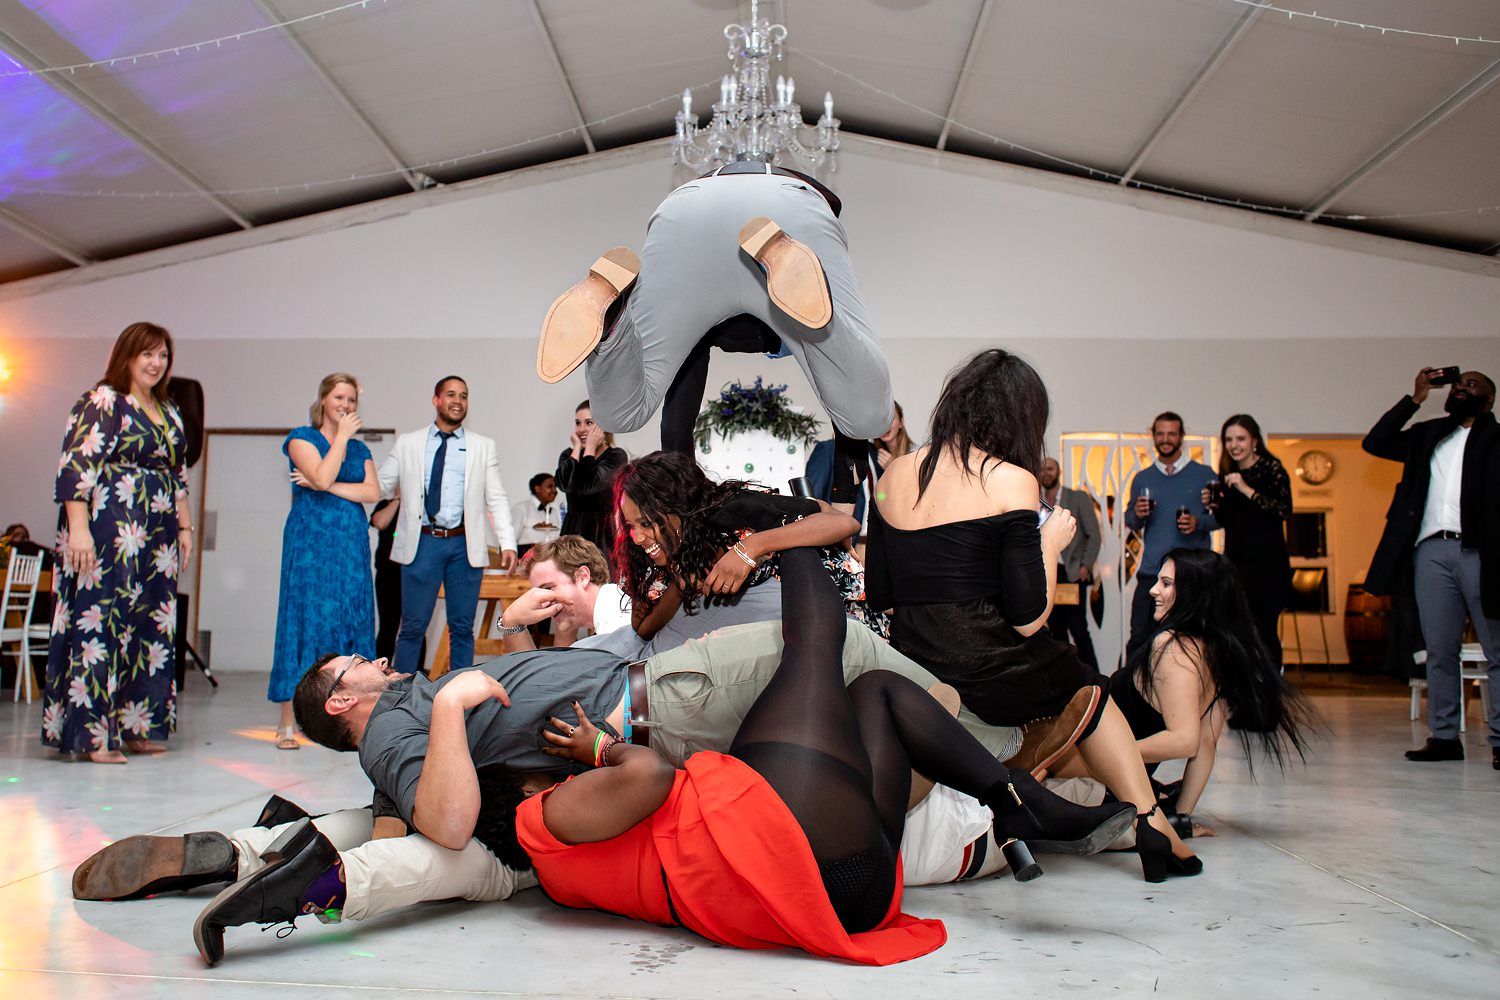 Guests pile up in the middle of the dancefloor during the song 'Free Fallin' by Tom Petty at the wedding reception, with one wedding guest in mid flight